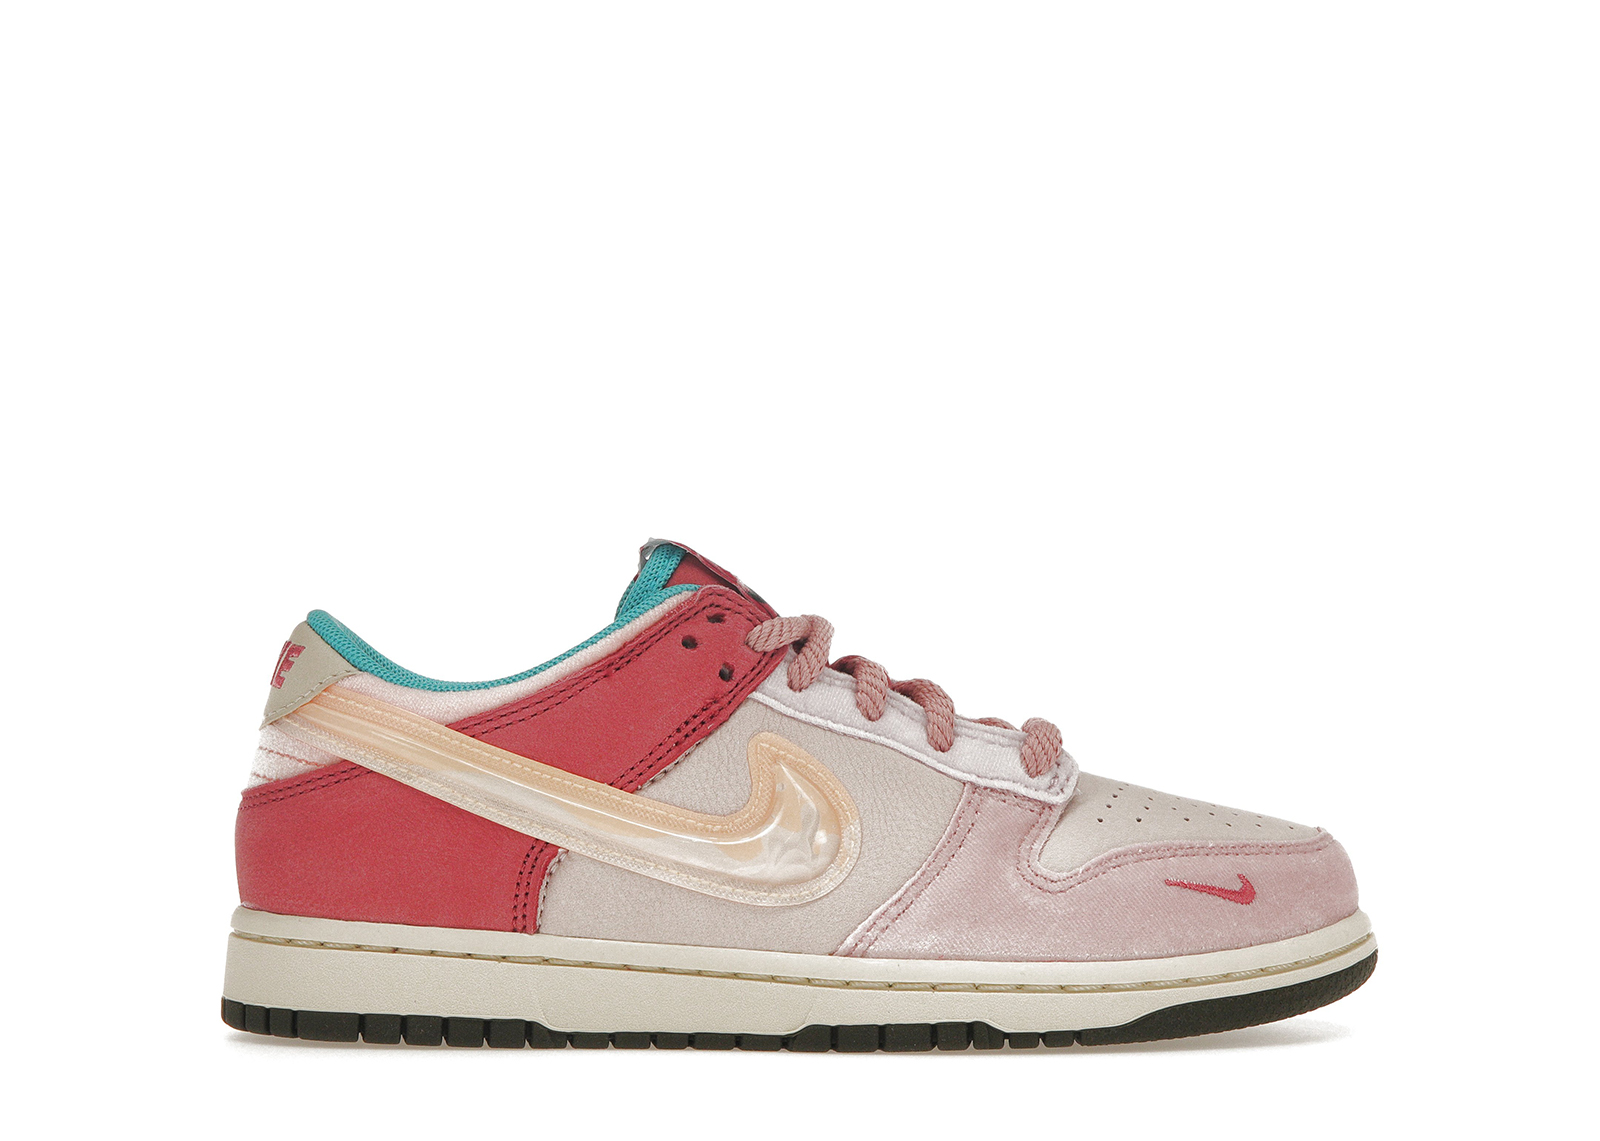 Nike Dunk Low Social Status Free Lunch Strawberry Milk (PS)